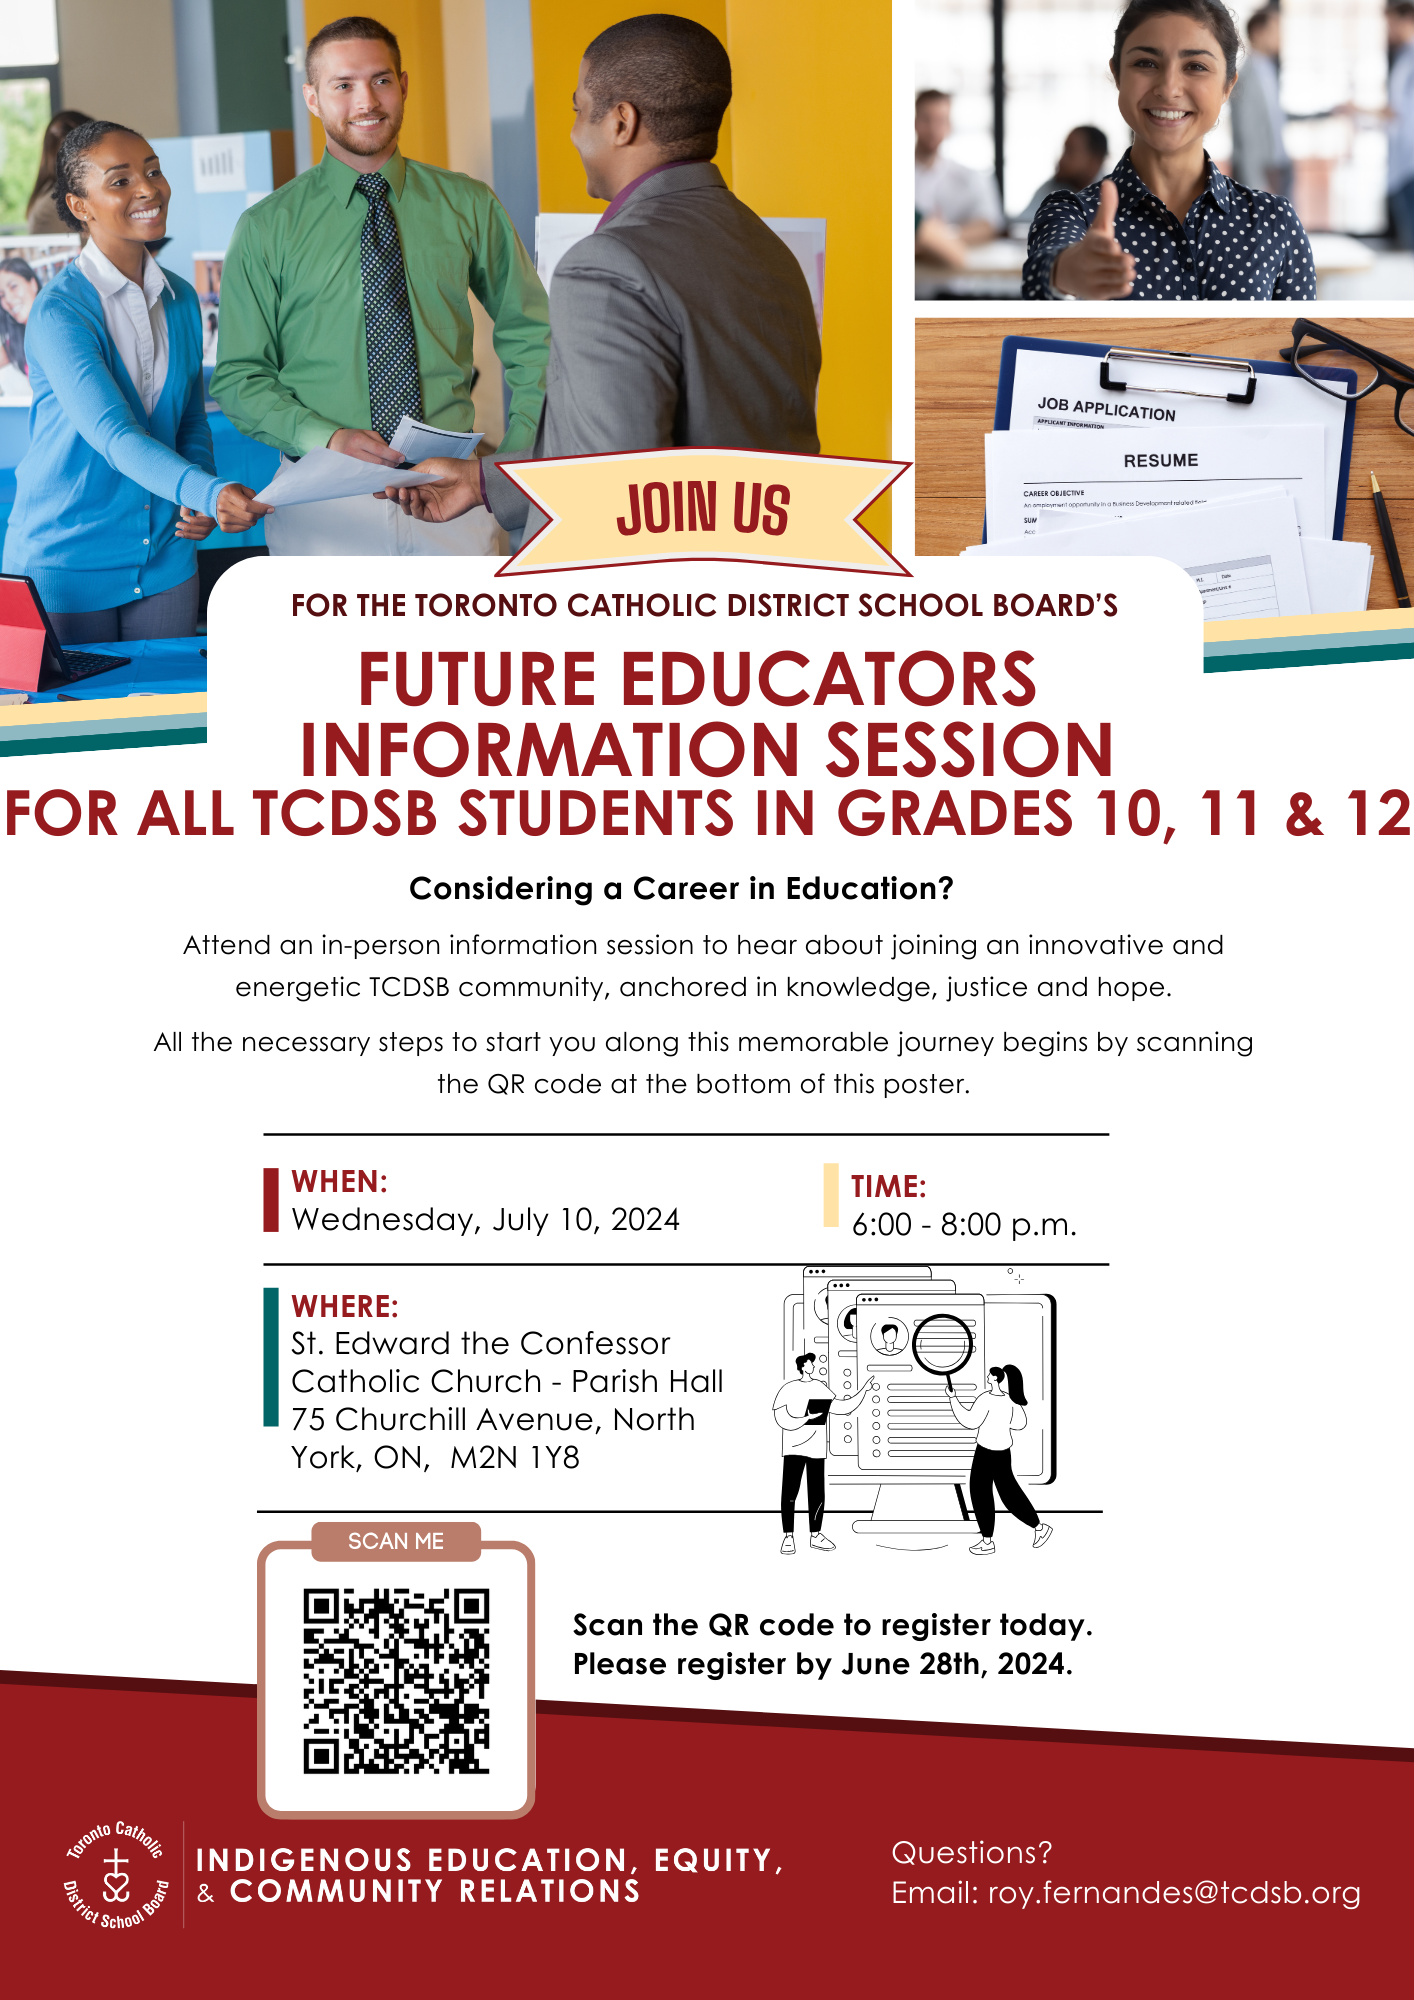 Join us for the Toronto Catholic District School Board's Future Educators Information Session for all TCDSB students in Grades 10, 11 and 12. - Considering a Career in Education? - Attend an in-person information session to hear about joining an innovative and energetic TCDSB community, anchored in knowledge, justice and hope. - All the necessary steps to start you along this memorable journey begins by scanning the QR code at the bottom of this poster. - July 10, 2024 (Wednesday) - 6 to 8 PM - Where: St. Edward the Confessor Catholic Church - Parish Hall, 75 Churchill Avenue, North York, ON, M2N 1Y8 - Scan the QR code to register today - Please register by June 28, 2024 - Questions? - Email roy.fernandes@tcdsb.org